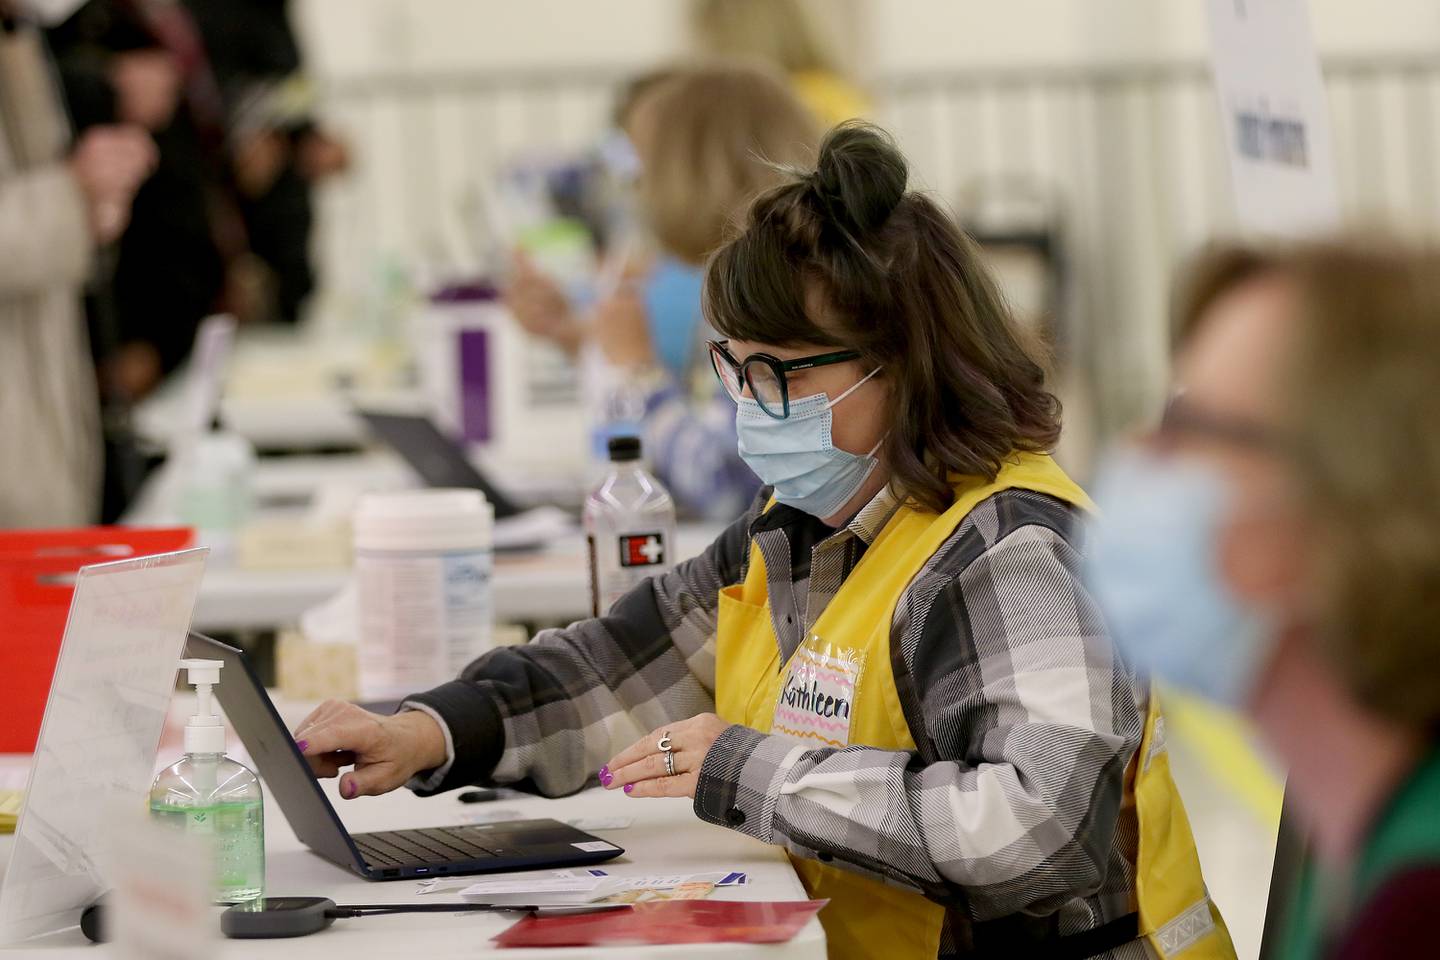 Workers check in people with appointments Tuesday, March 2, 2021, during a COVID-19 vaccination clinic through the McHenry County Department of Health at 1900 N. Richmond Road, the former site of a Kmart in McHenry. Vaccinations are made by appointment only.